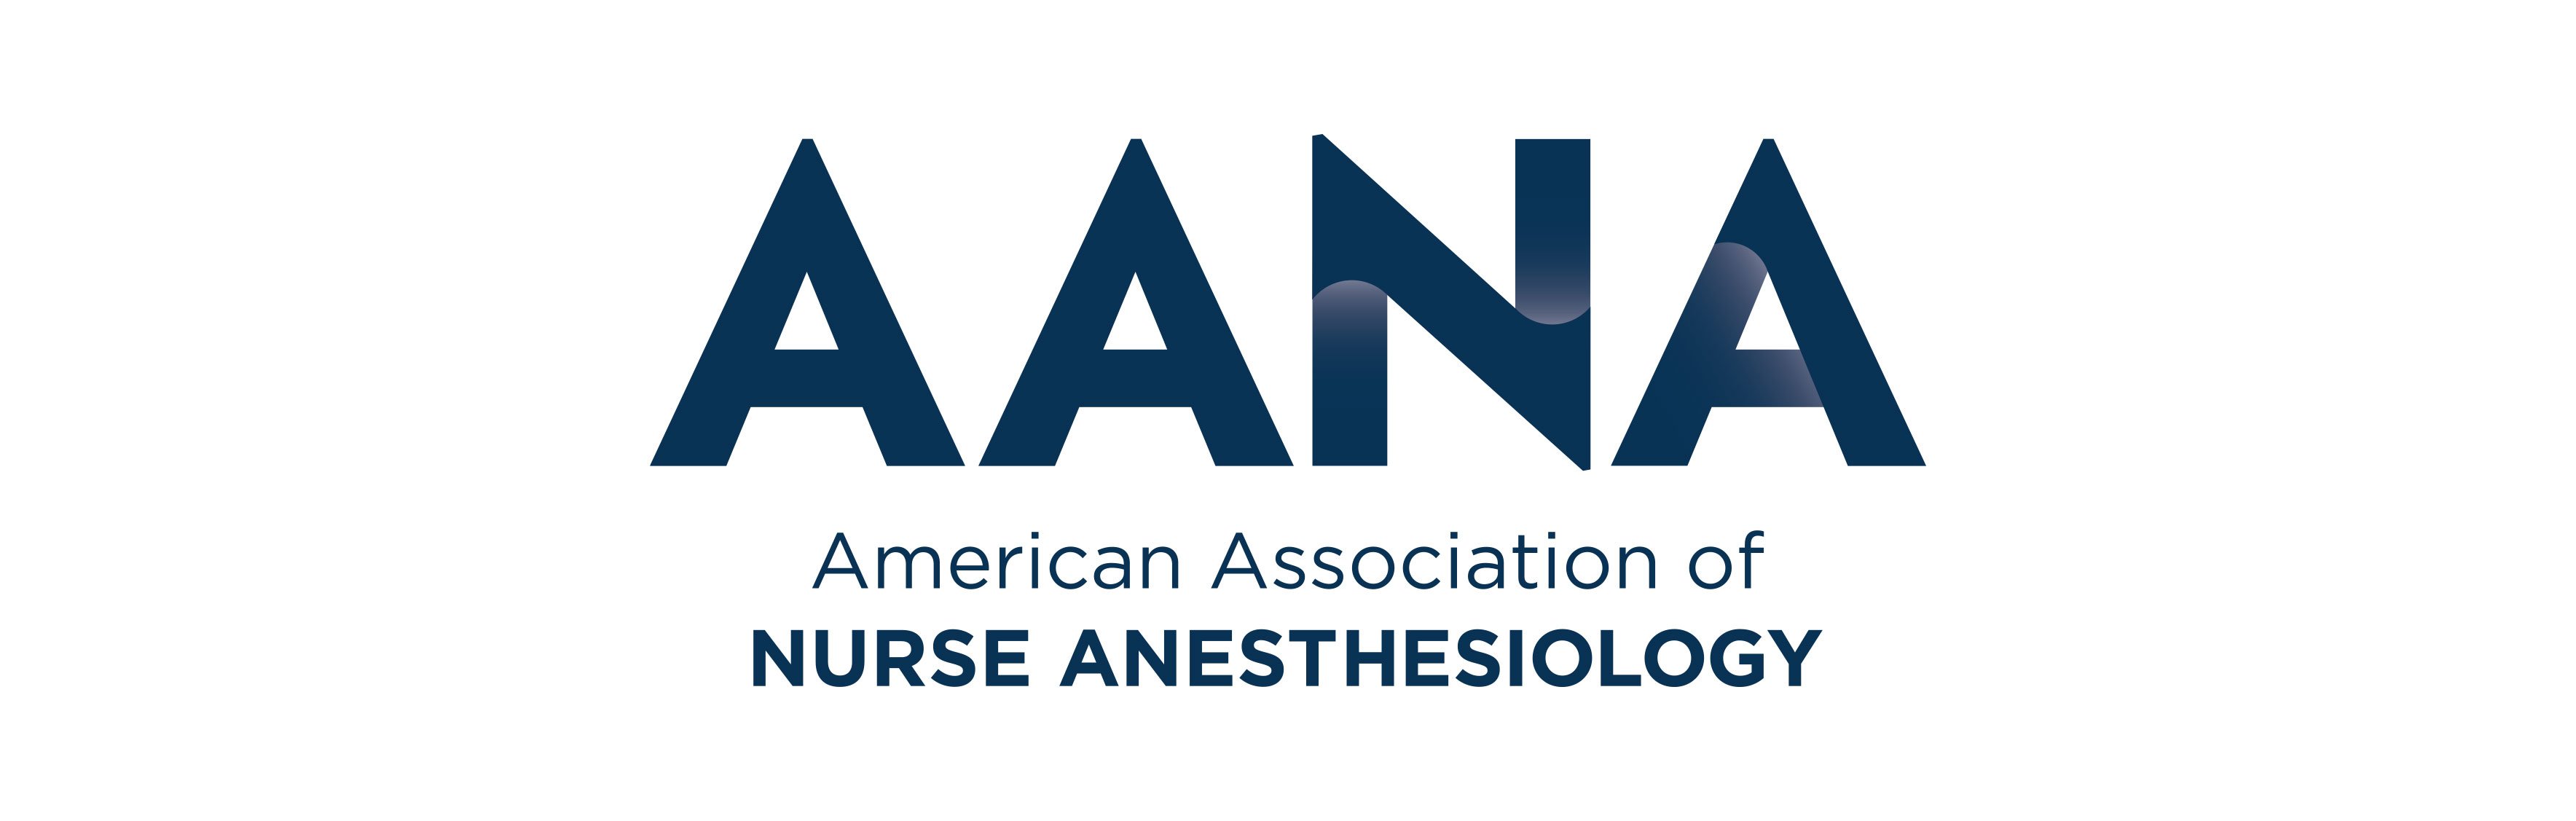 American Association of Nurse Anesthesiology logo created by Vendi Advertising